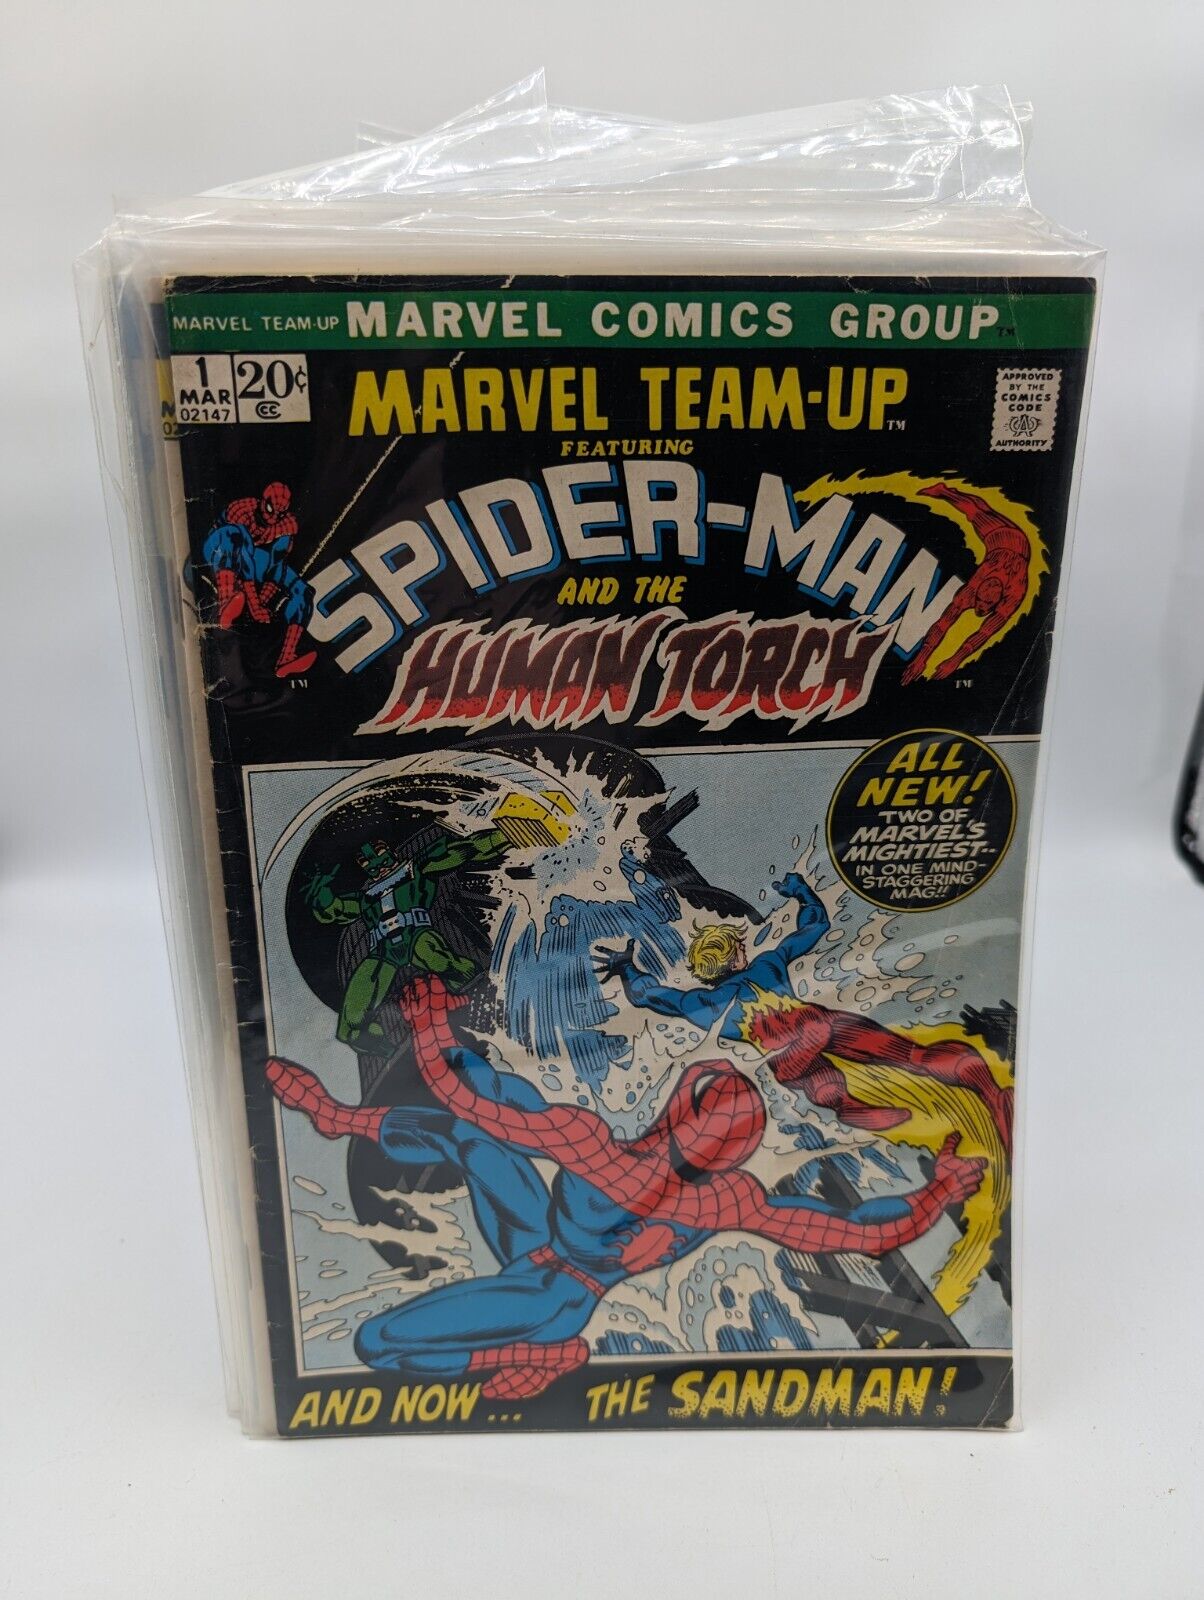 1972 Marvel Team-Up Spider-Man and the Human Torch Issue #1